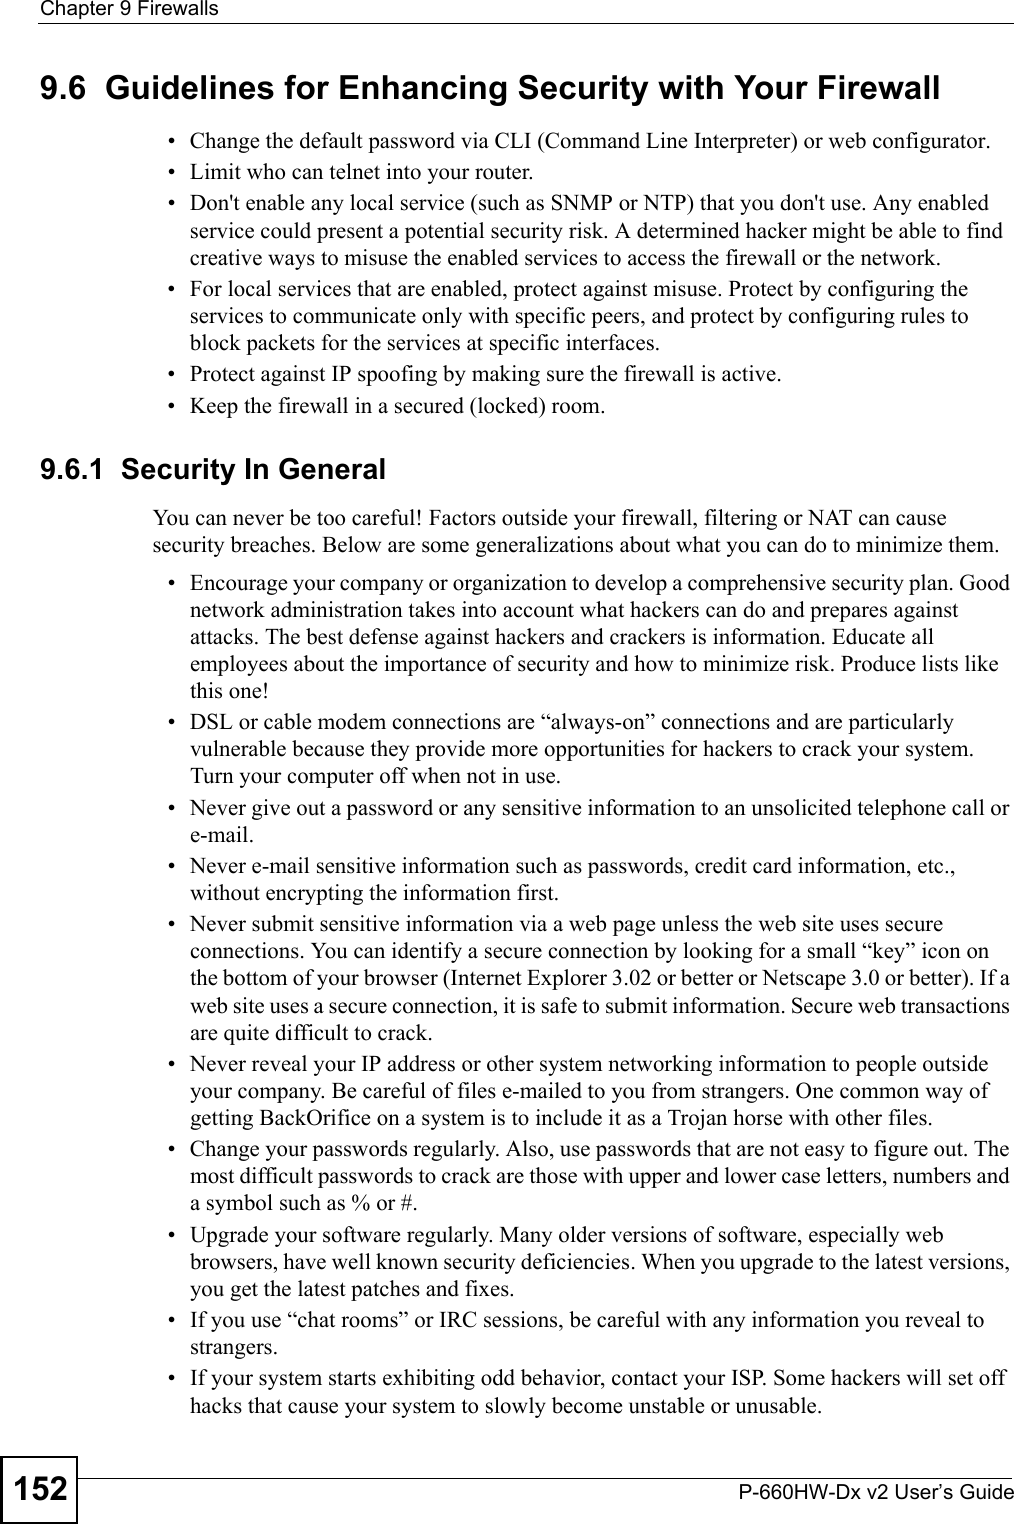 Chapter 9 FirewallsP-660HW-Dx v2 User’s Guide1529.6  Guidelines for Enhancing Security with Your Firewall• Change the default password via CLI (Command Line Interpreter) or web configurator. • Limit who can telnet into your router. • Don&apos;t enable any local service (such as SNMP or NTP) that you don&apos;t use. Any enabled service could present a potential security risk. A determined hacker might be able to find creative ways to misuse the enabled services to access the firewall or the network. • For local services that are enabled, protect against misuse. Protect by configuring the services to communicate only with specific peers, and protect by configuring rules to block packets for the services at specific interfaces. • Protect against IP spoofing by making sure the firewall is active. • Keep the firewall in a secured (locked) room. 9.6.1  Security In GeneralYou can never be too careful! Factors outside your firewall, filtering or NAT can cause security breaches. Below are some generalizations about what you can do to minimize them.• Encourage your company or organization to develop a comprehensive security plan. Good network administration takes into account what hackers can do and prepares against attacks. The best defense against hackers and crackers is information. Educate all employees about the importance of security and how to minimize risk. Produce lists like this one!• DSL or cable modem connections are “always-on” connections and are particularly vulnerable because they provide more opportunities for hackers to crack your system. Turn your computer off when not in use. • Never give out a password or any sensitive information to an unsolicited telephone call or e-mail.• Never e-mail sensitive information such as passwords, credit card information, etc., without encrypting the information first.• Never submit sensitive information via a web page unless the web site uses secure connections. You can identify a secure connection by looking for a small “key” icon on the bottom of your browser (Internet Explorer 3.02 or better or Netscape 3.0 or better). If a web site uses a secure connection, it is safe to submit information. Secure web transactions are quite difficult to crack.• Never reveal your IP address or other system networking information to people outside your company. Be careful of files e-mailed to you from strangers. One common way of getting BackOrifice on a system is to include it as a Trojan horse with other files.• Change your passwords regularly. Also, use passwords that are not easy to figure out. The most difficult passwords to crack are those with upper and lower case letters, numbers and a symbol such as % or #.• Upgrade your software regularly. Many older versions of software, especially web browsers, have well known security deficiencies. When you upgrade to the latest versions, you get the latest patches and fixes.• If you use “chat rooms” or IRC sessions, be careful with any information you reveal to strangers.• If your system starts exhibiting odd behavior, contact your ISP. Some hackers will set off hacks that cause your system to slowly become unstable or unusable. 